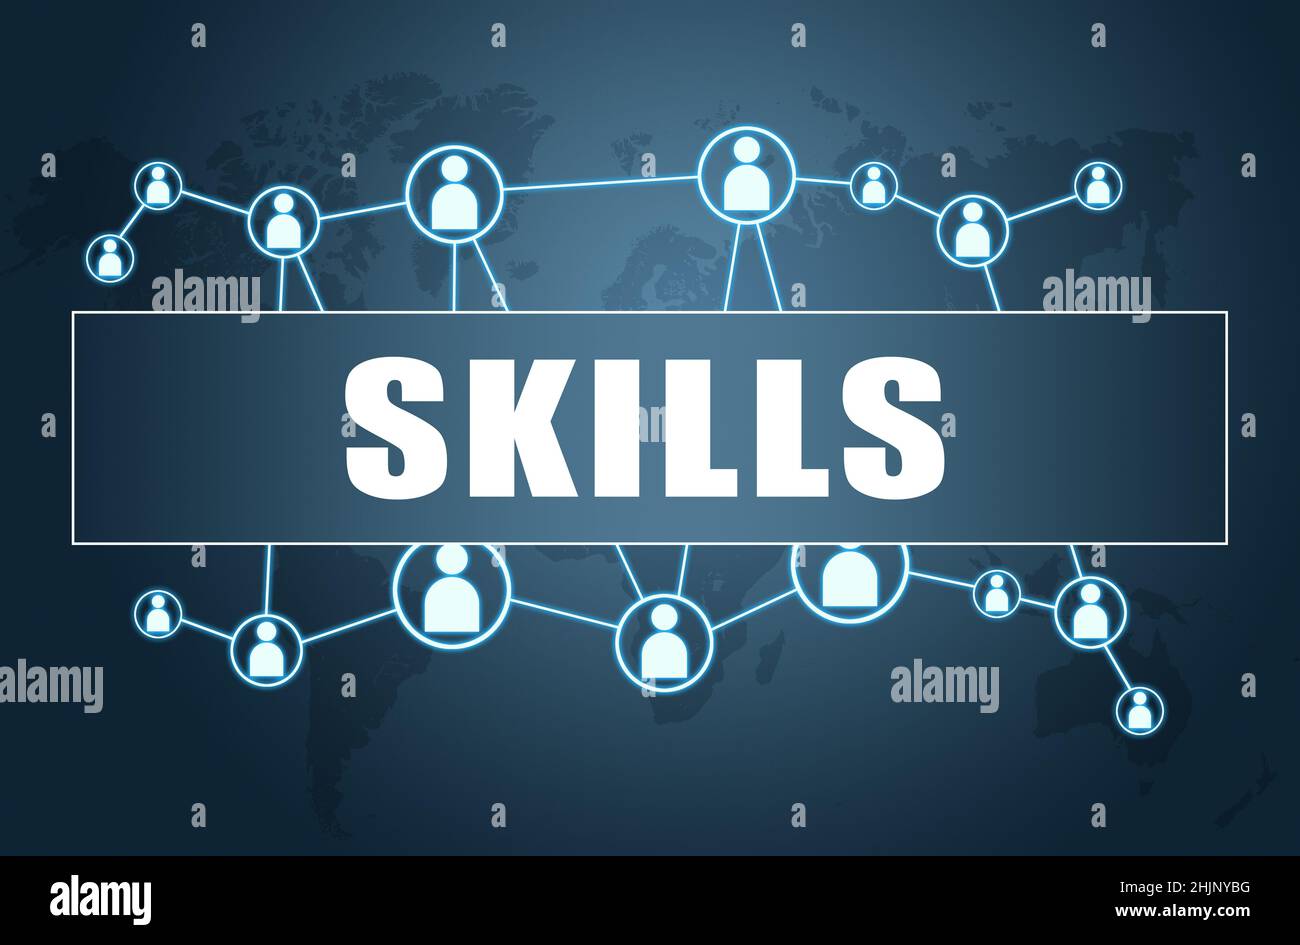 Skills - text concept on blue background with world map and social icons. Stock Photo